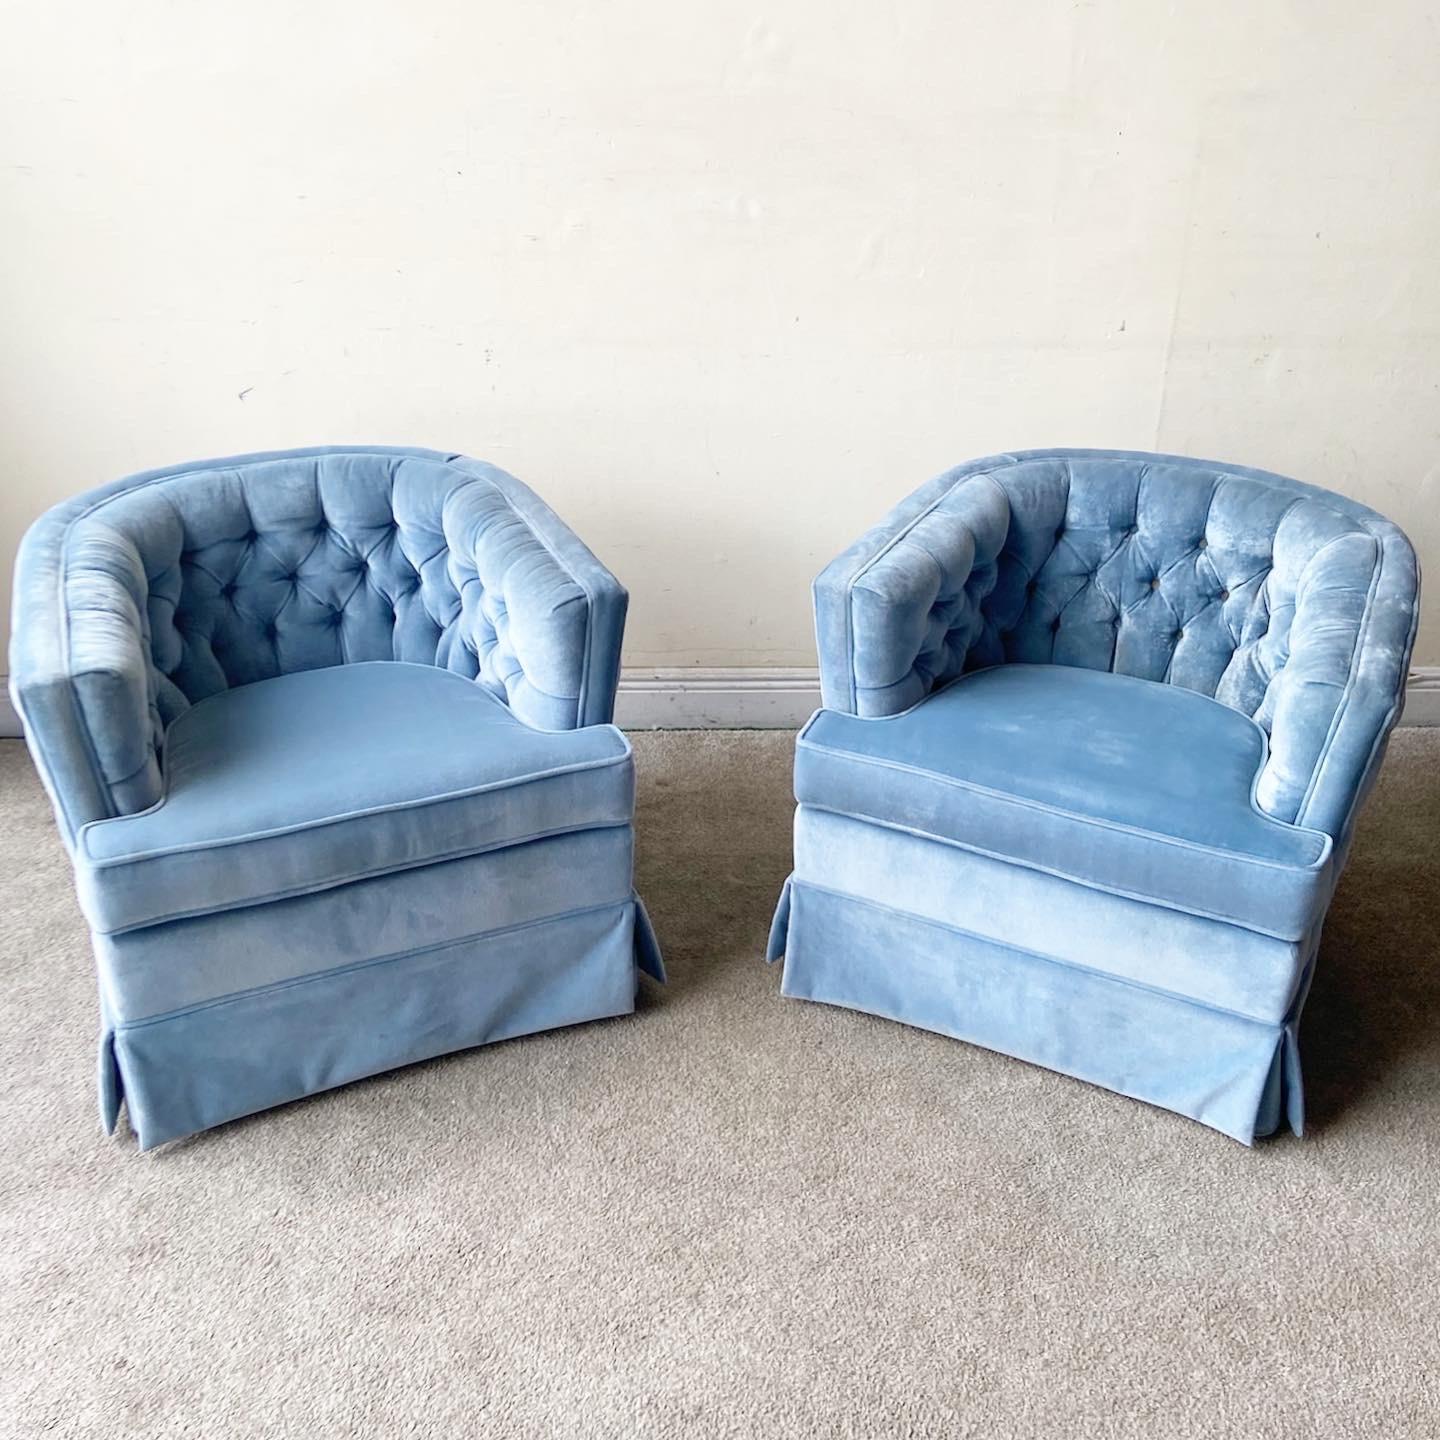 Fantastic set of two blue mid century barrel chairs. Each feature a vibrant blue velvet fabric with a tufted back rest and all around the outside of the chairs.